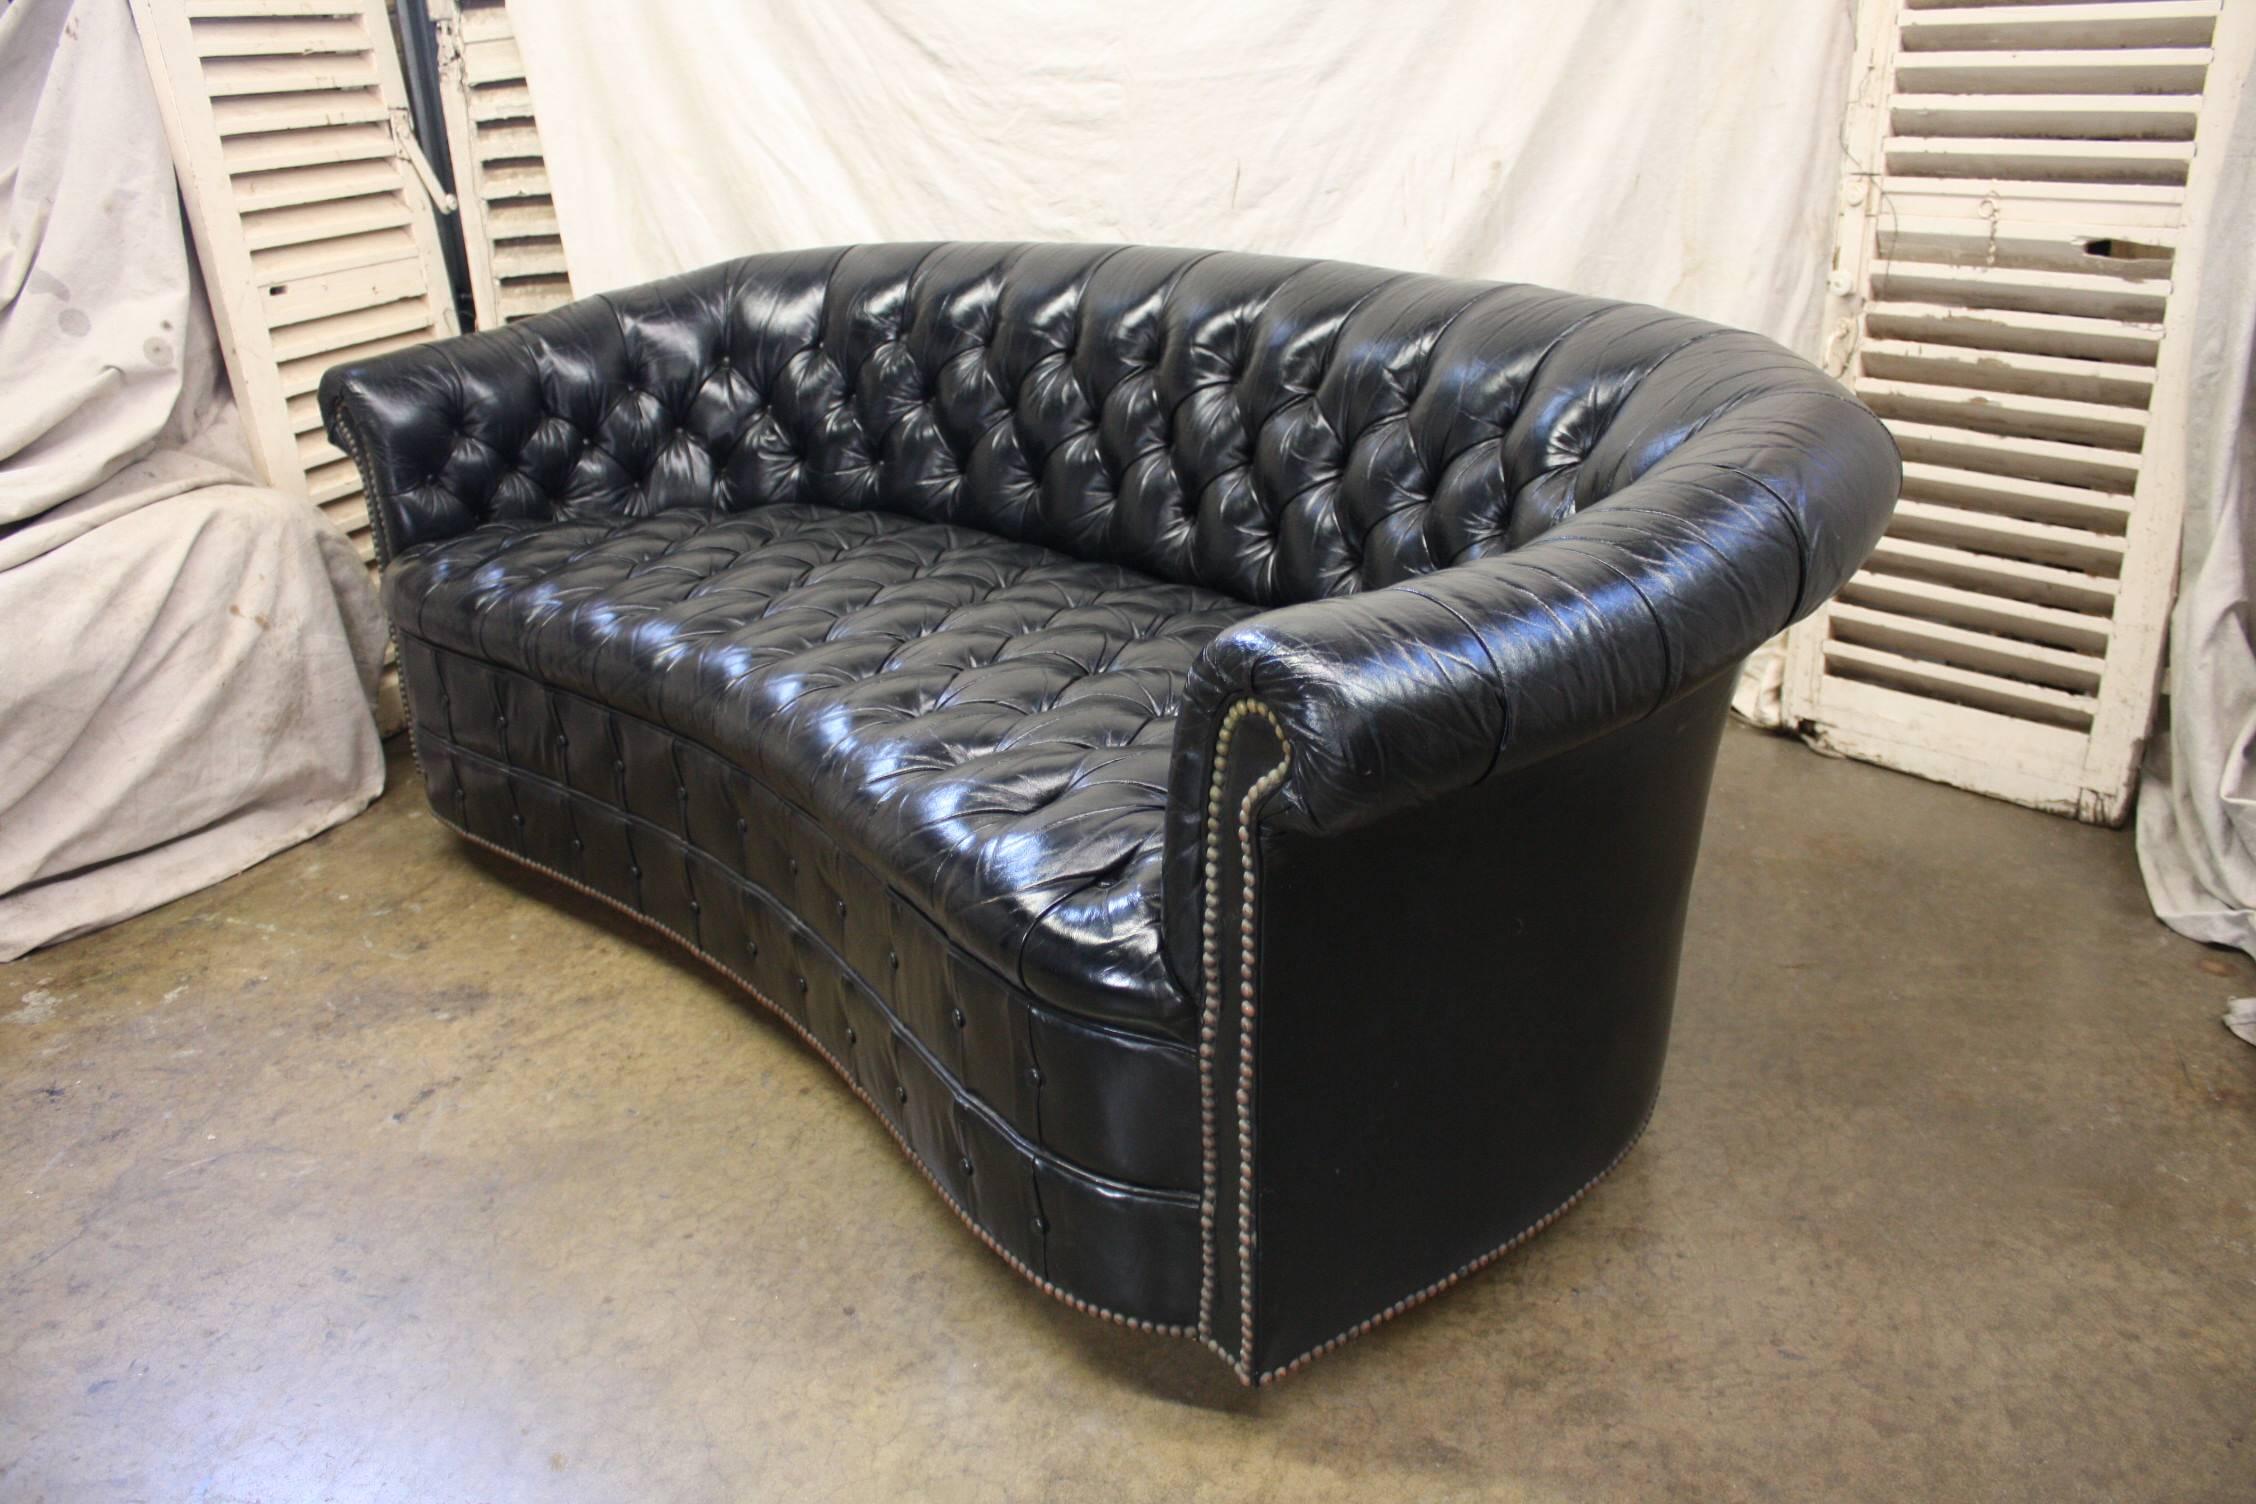 Gorgeous black leather Chesterfield.